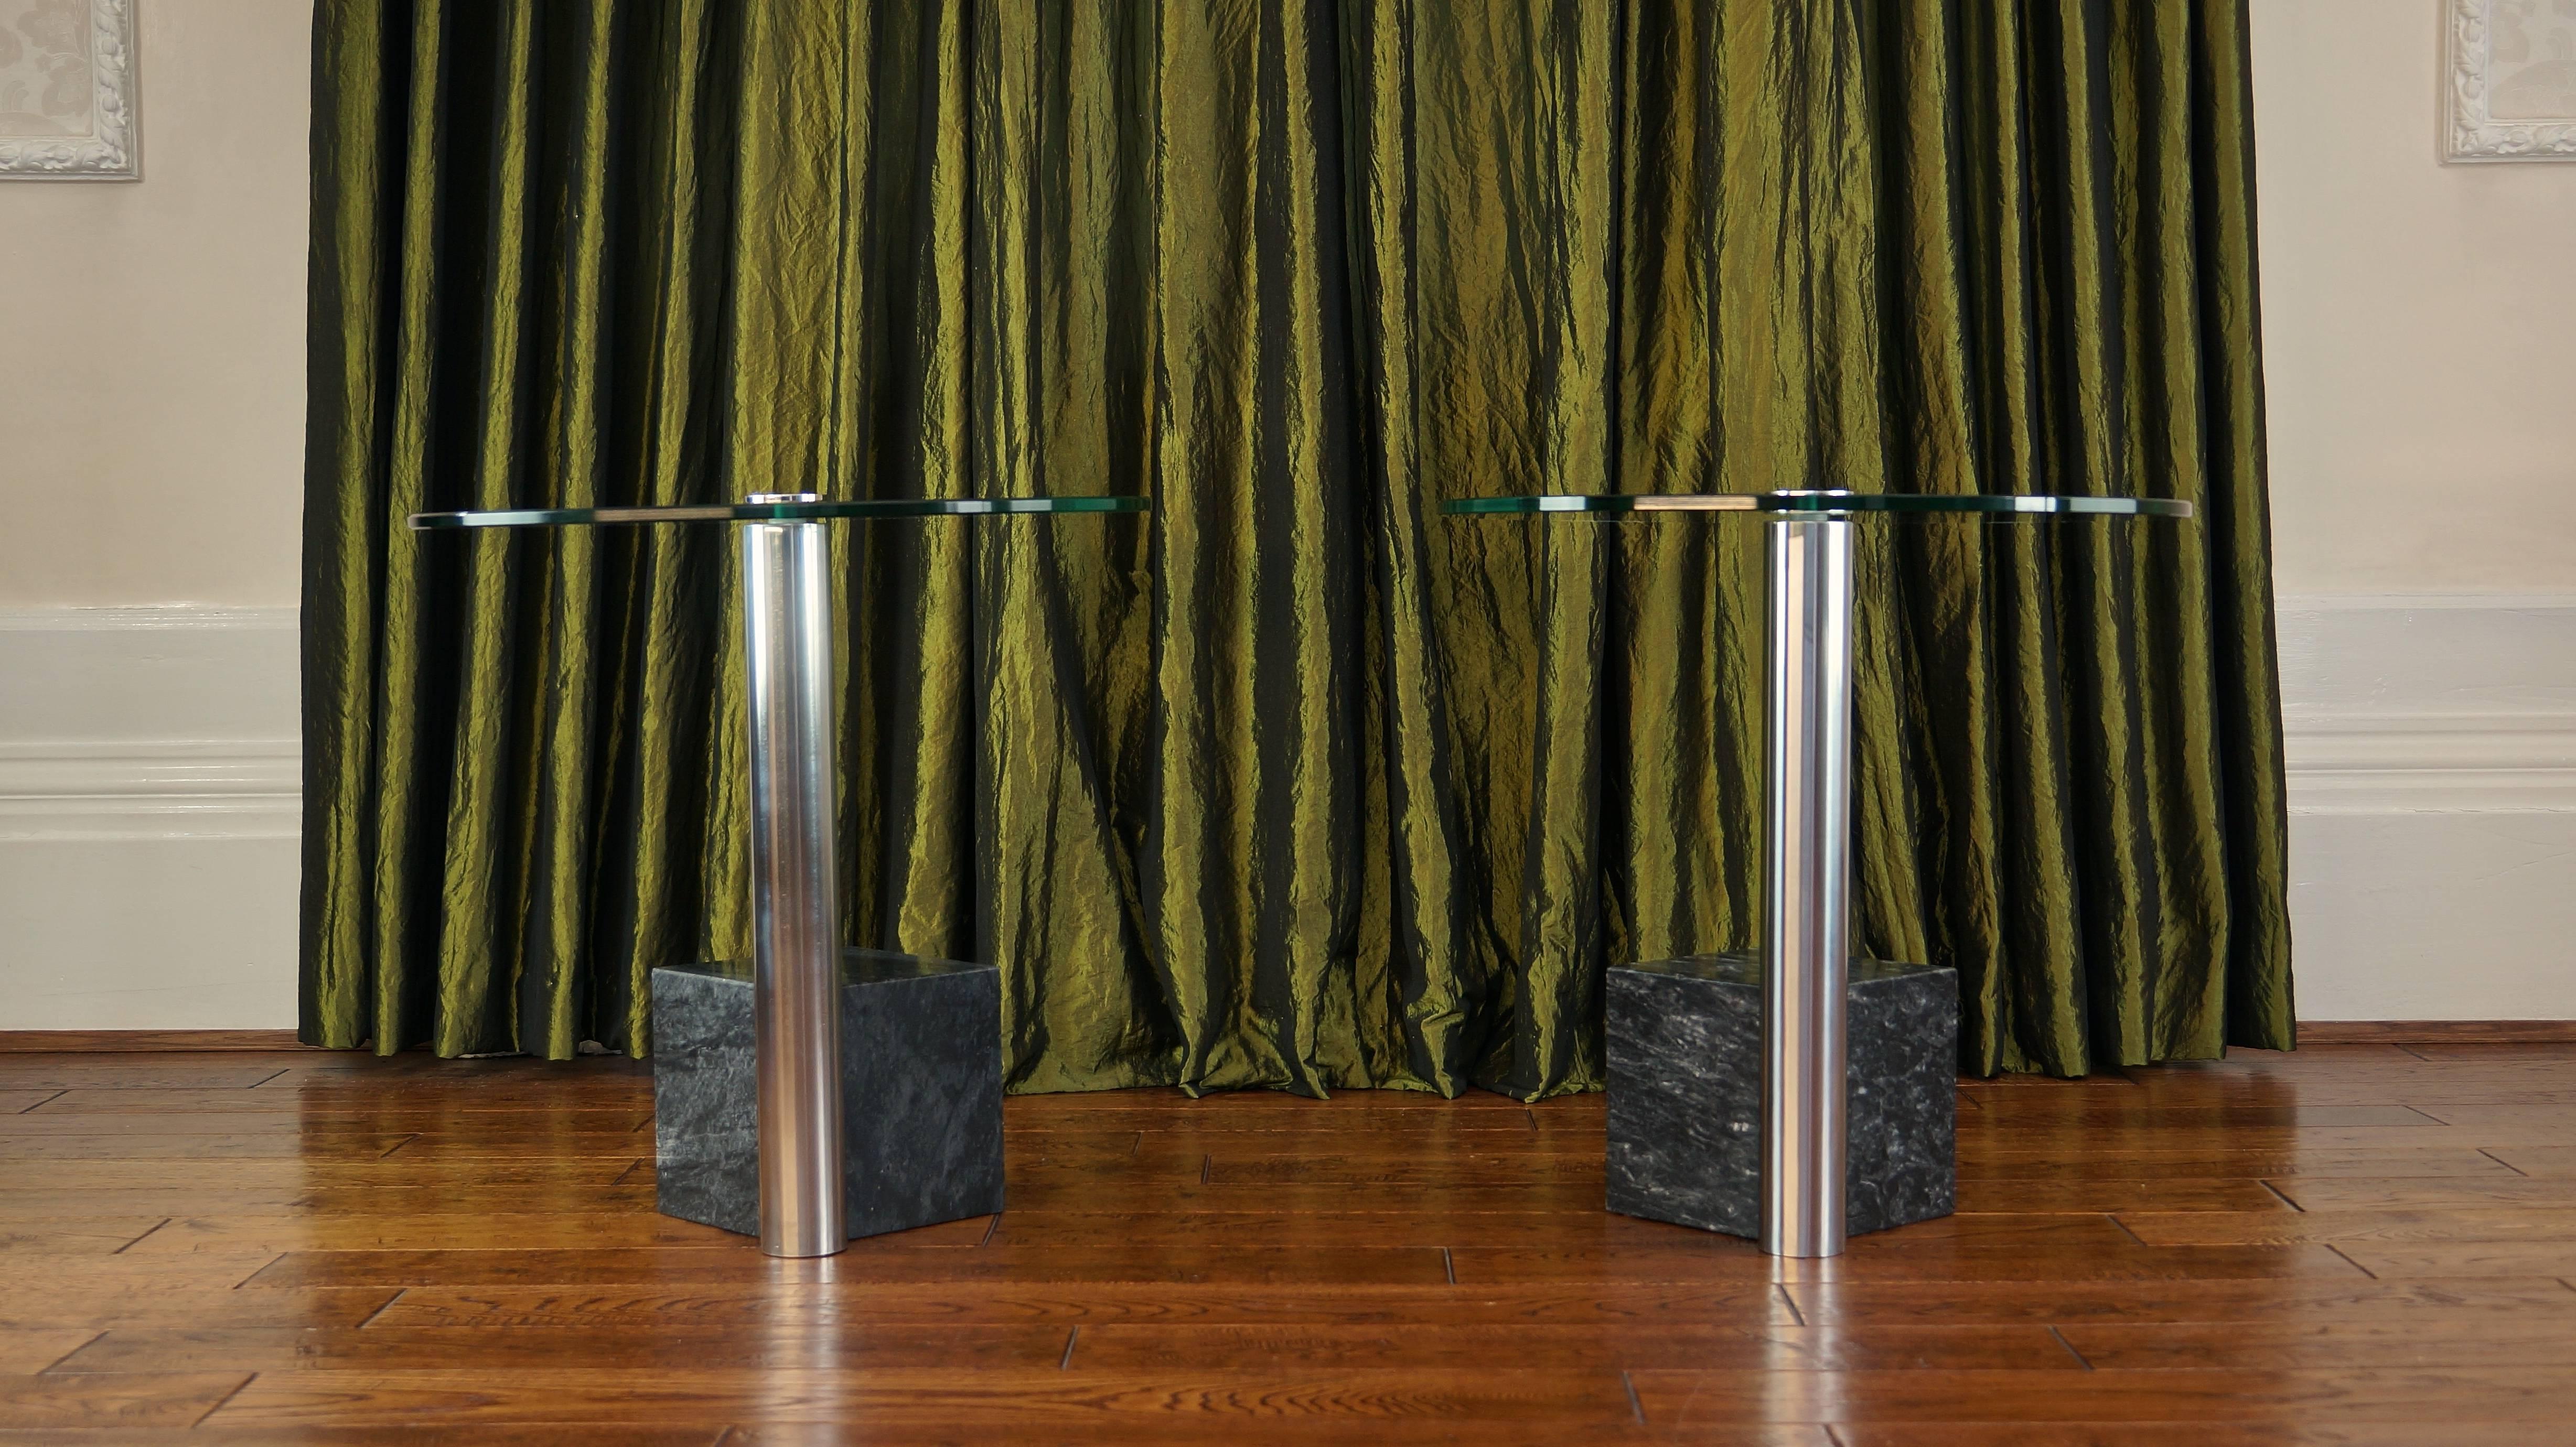 Pair of Vintage Marble and Glass HK2 Side Tables by Hank Kwint, Metaform 1980s In Good Condition For Sale In Huddersfield, GB